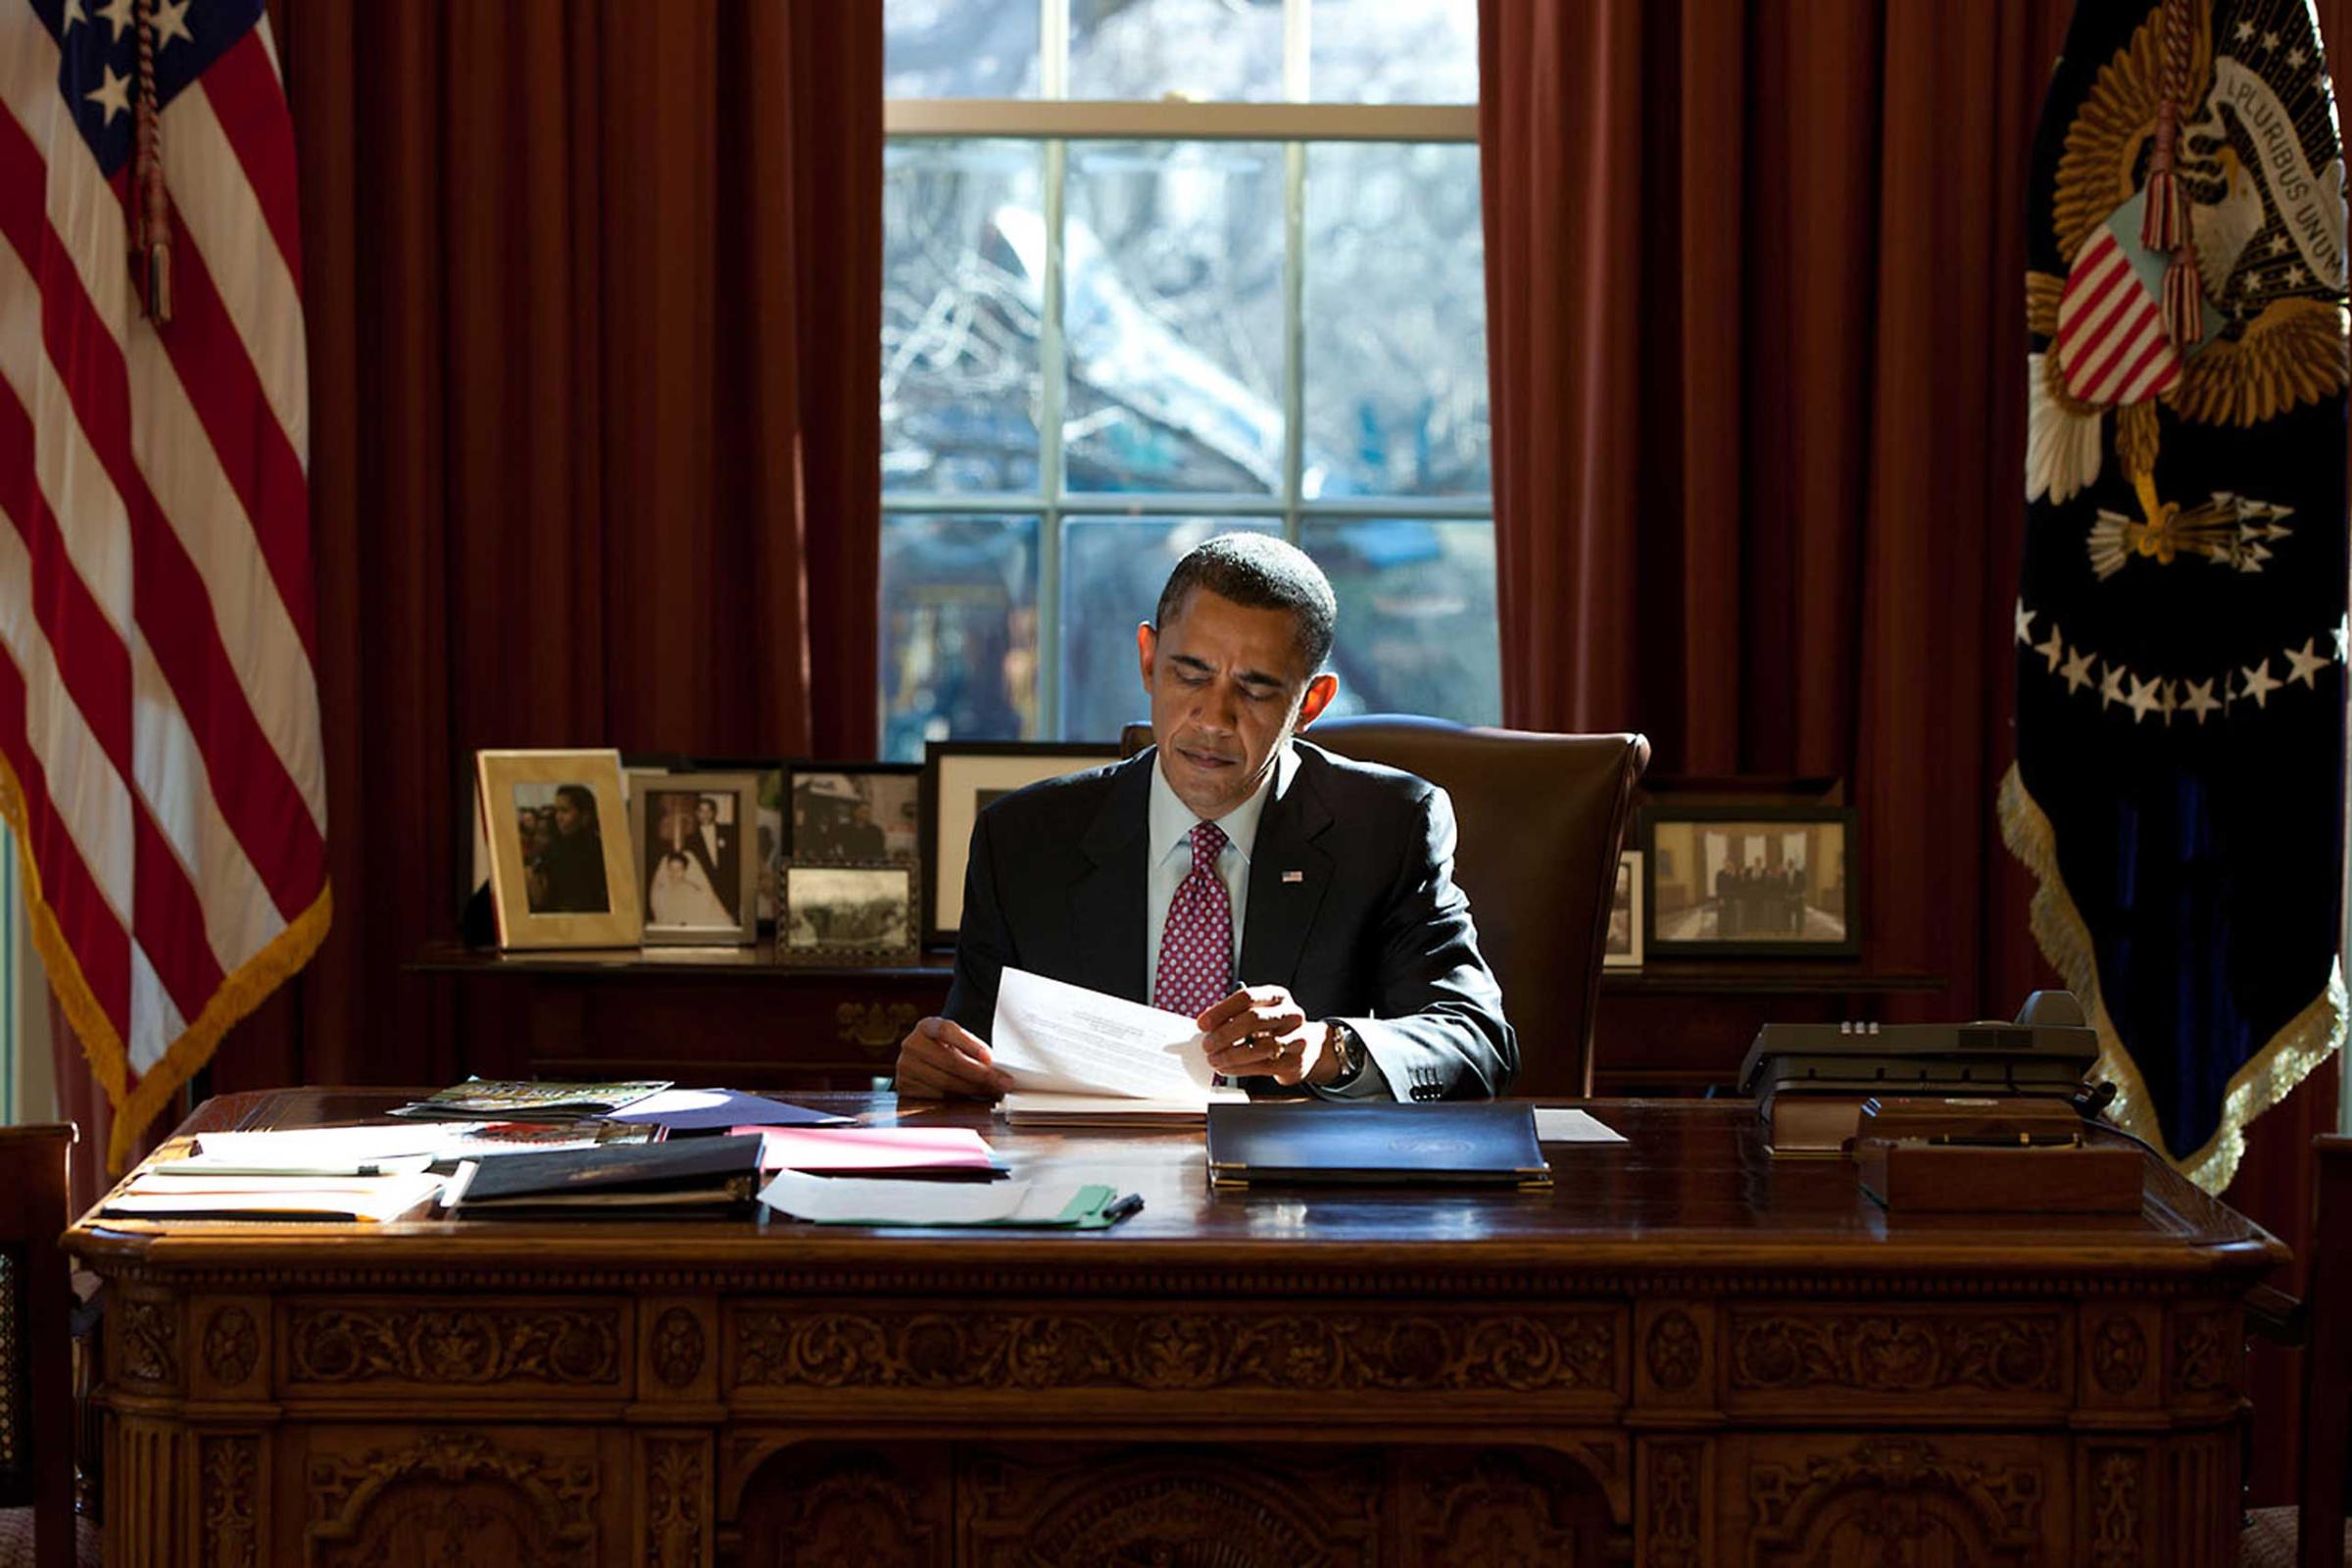 President Obama reads documents while sitting at the Resolute Desk in the Oval Office, Feb. 11, 2011.